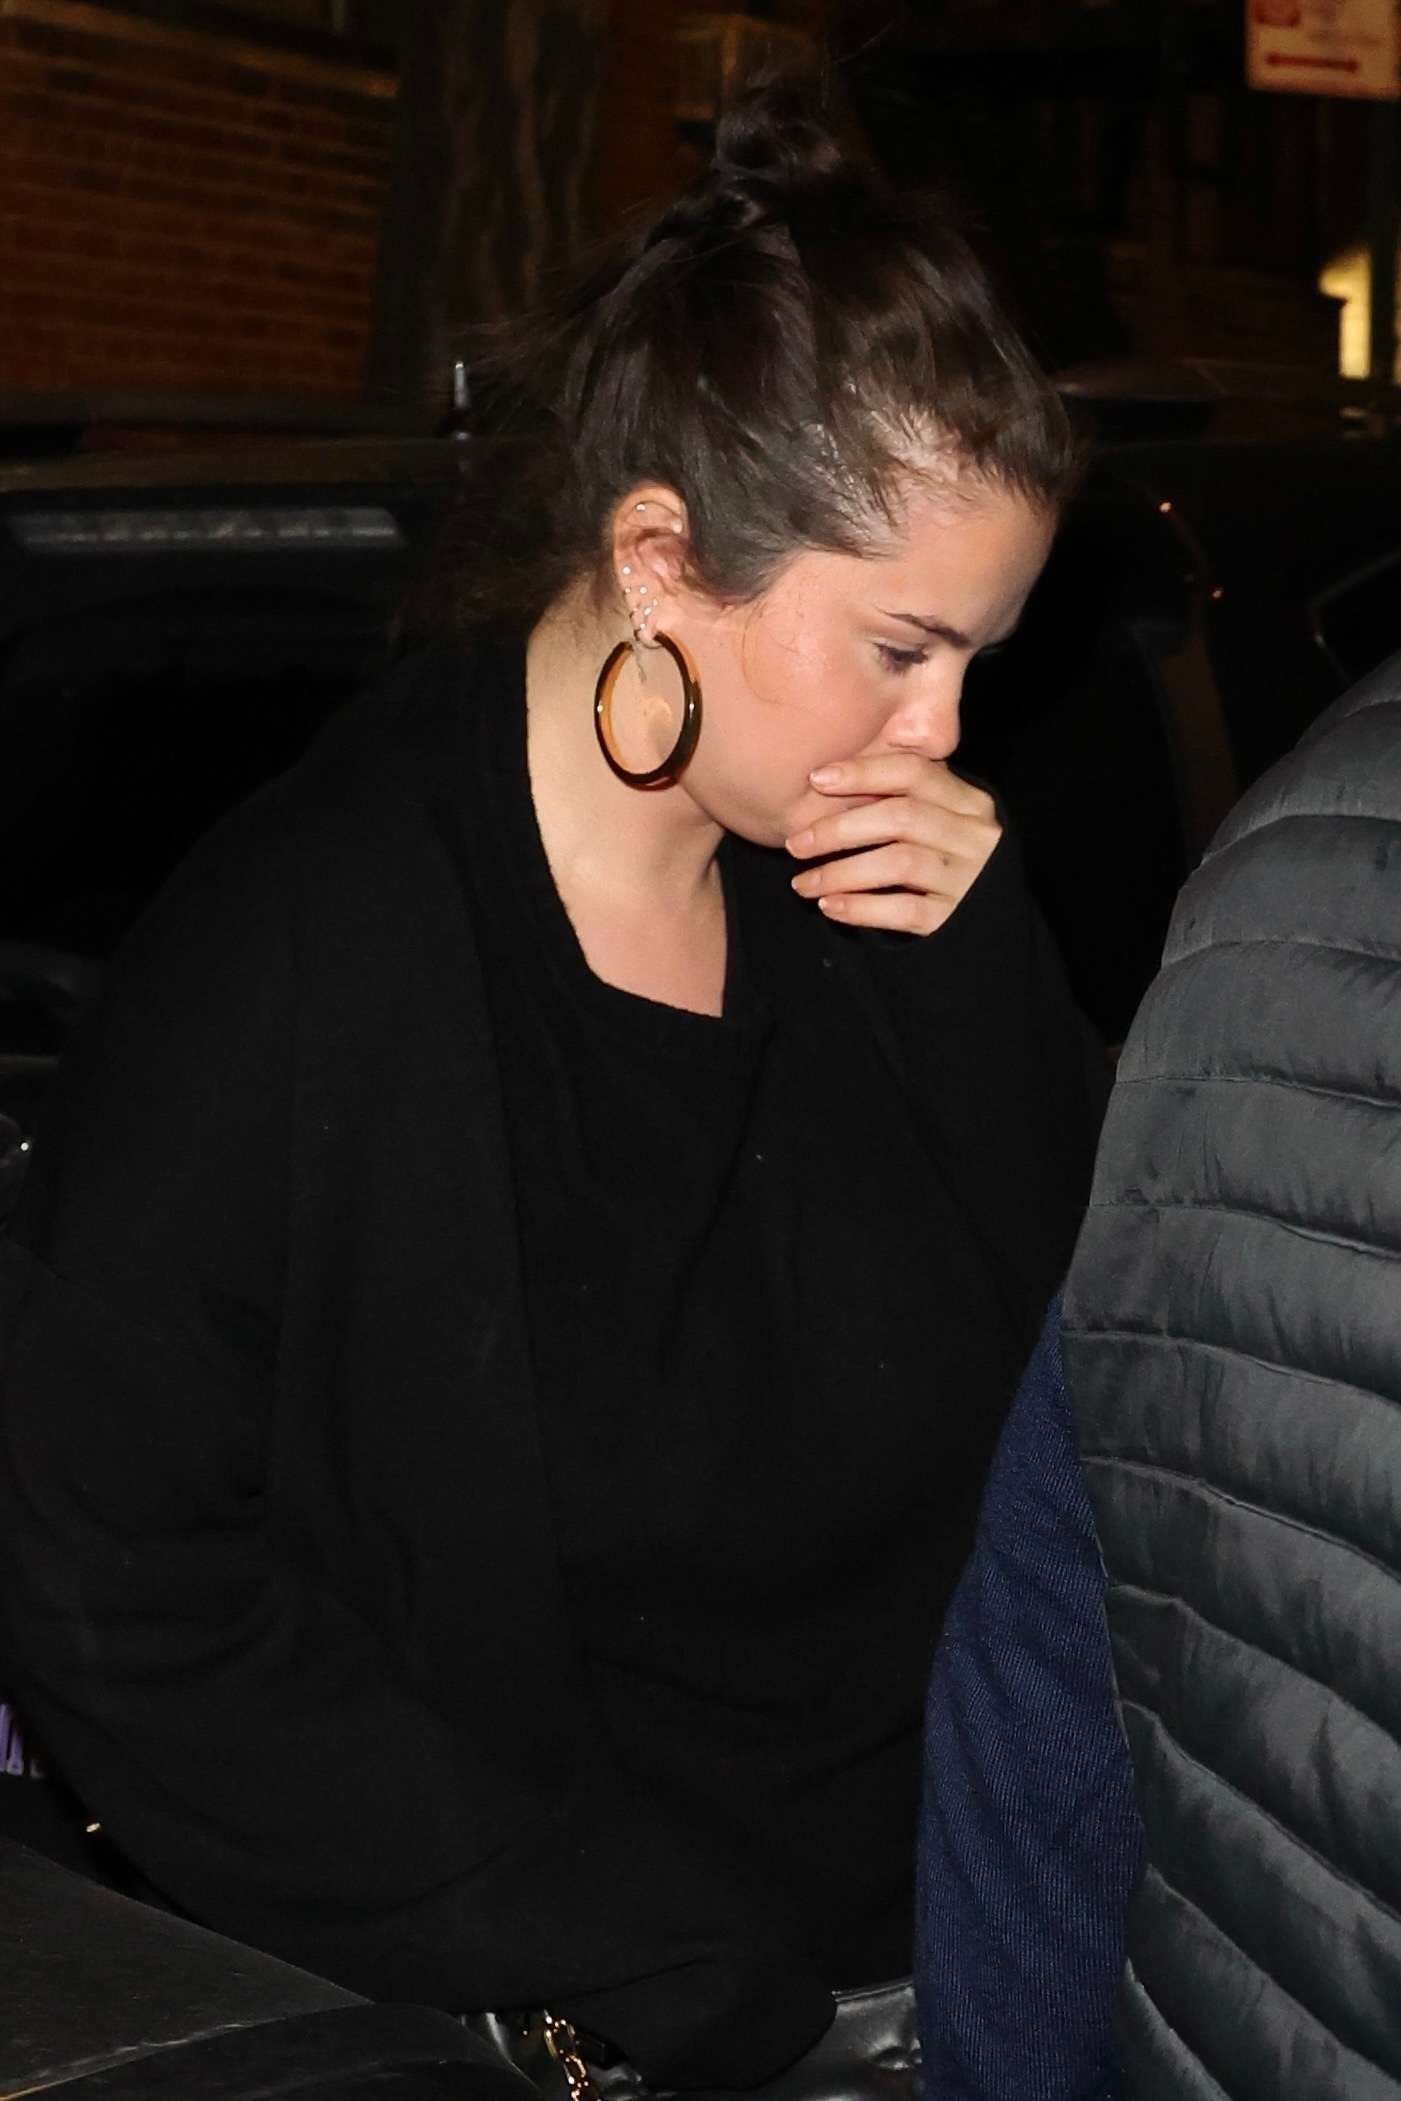 Selena_Gomez_-_goes_out_for_a_Valentine_s_Day_dinner_with_friends_at_The_Holiday_bar_in_New_York_City2C_0214202301.jpg